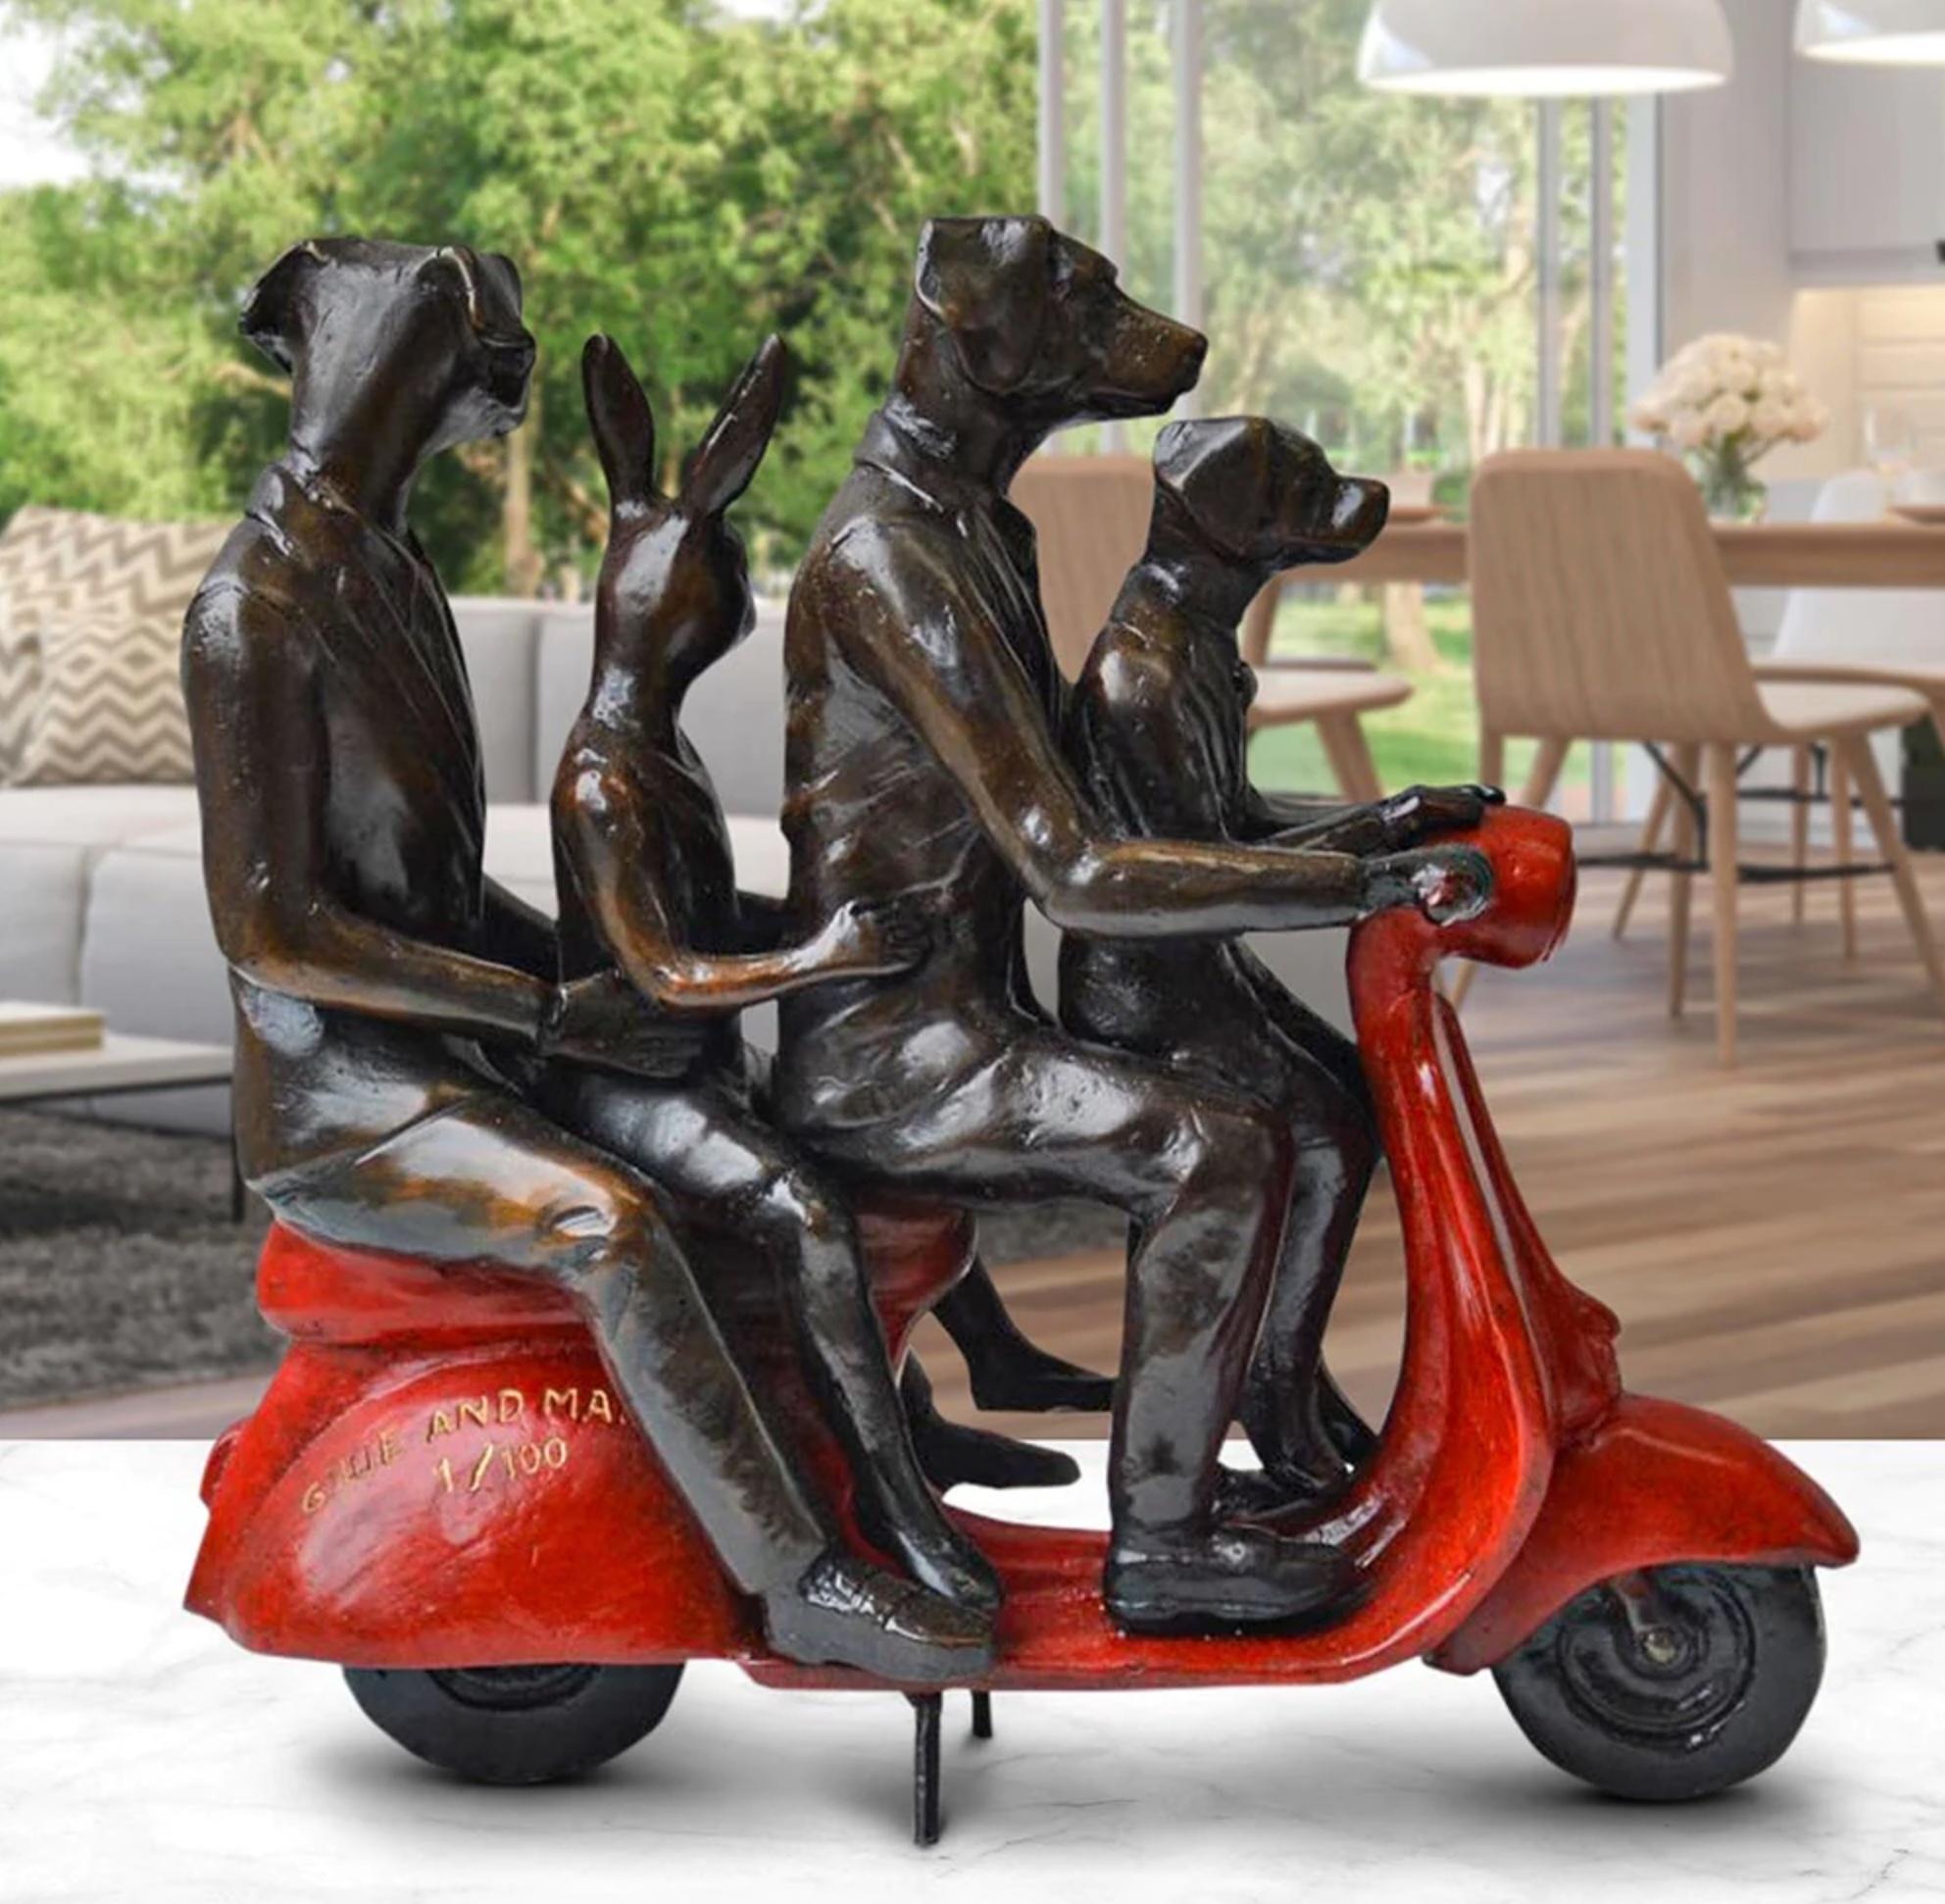 Title: The loving family vespa riders
Authentic bronze sculpture with Red Patina

This authentic bronze sculpture titled 'The loving family vespa riders' by artists Gillie and Marc has been meticulously crafted in bronze with red patina. It features